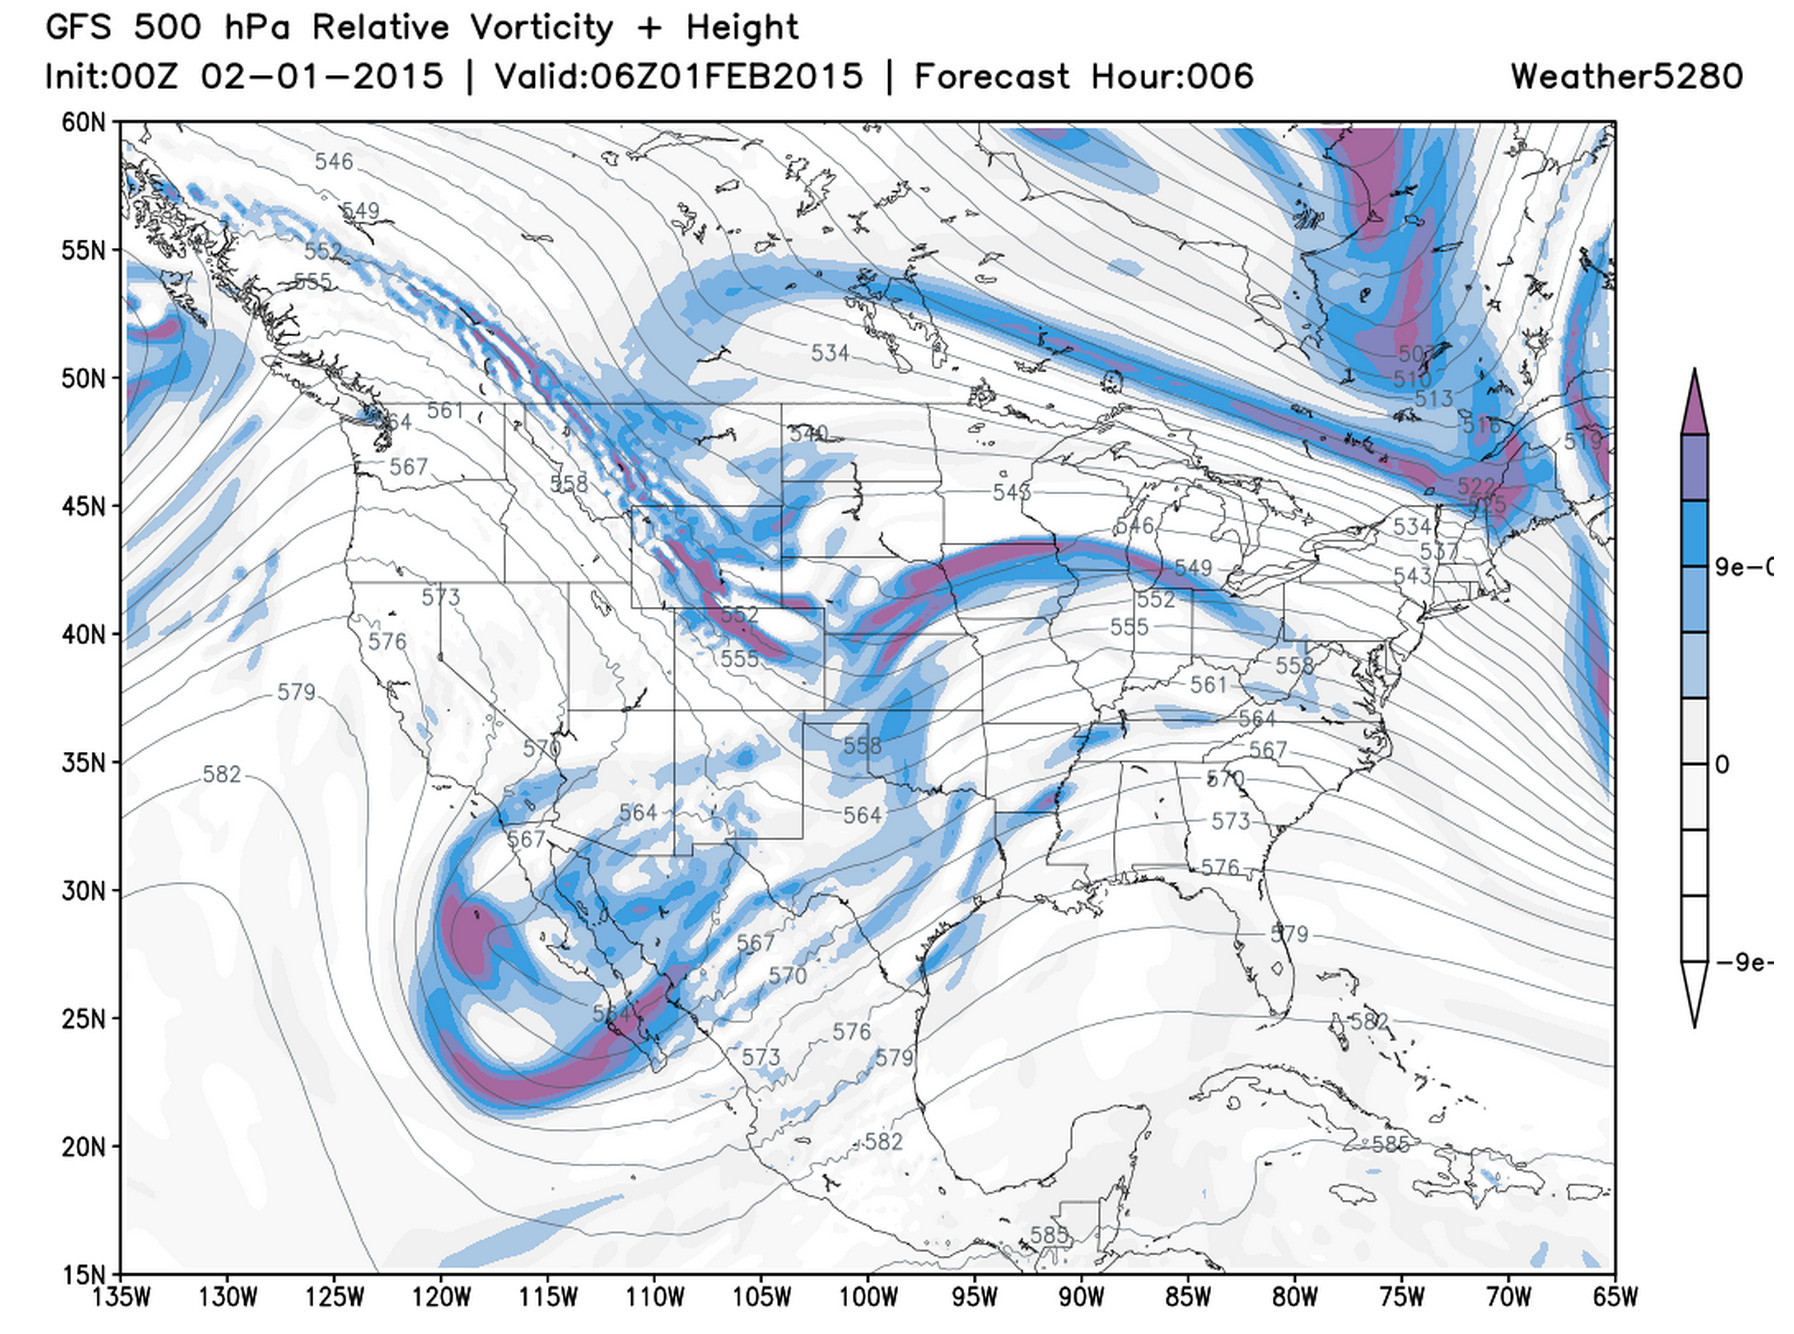 GFS 500 hpa relative vorticity valid last night with jet screaming overhead | Weather5280 Models